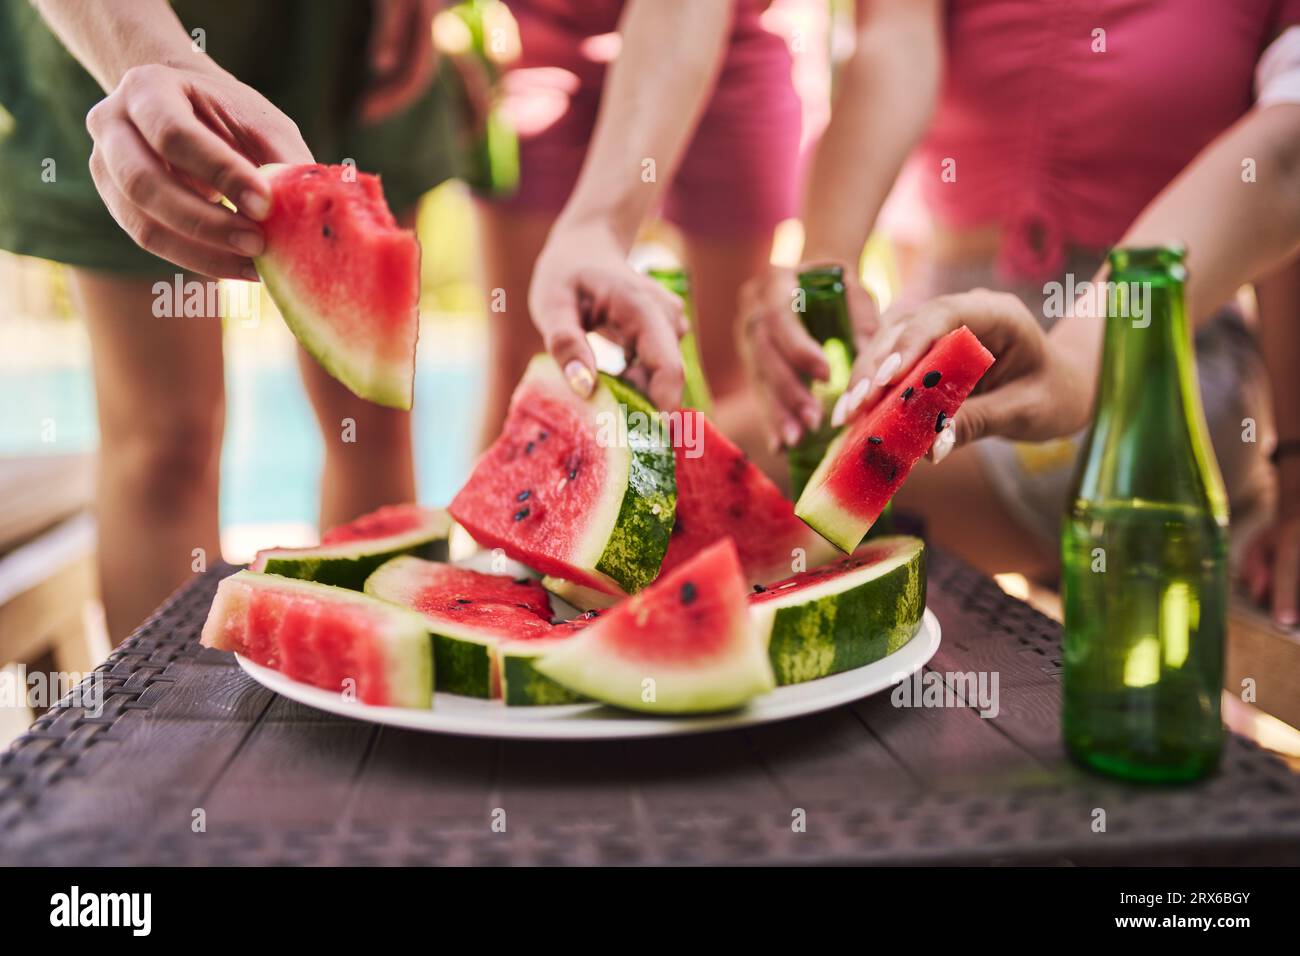 Hands of friends holding slices of watermelon at table Stock Photo